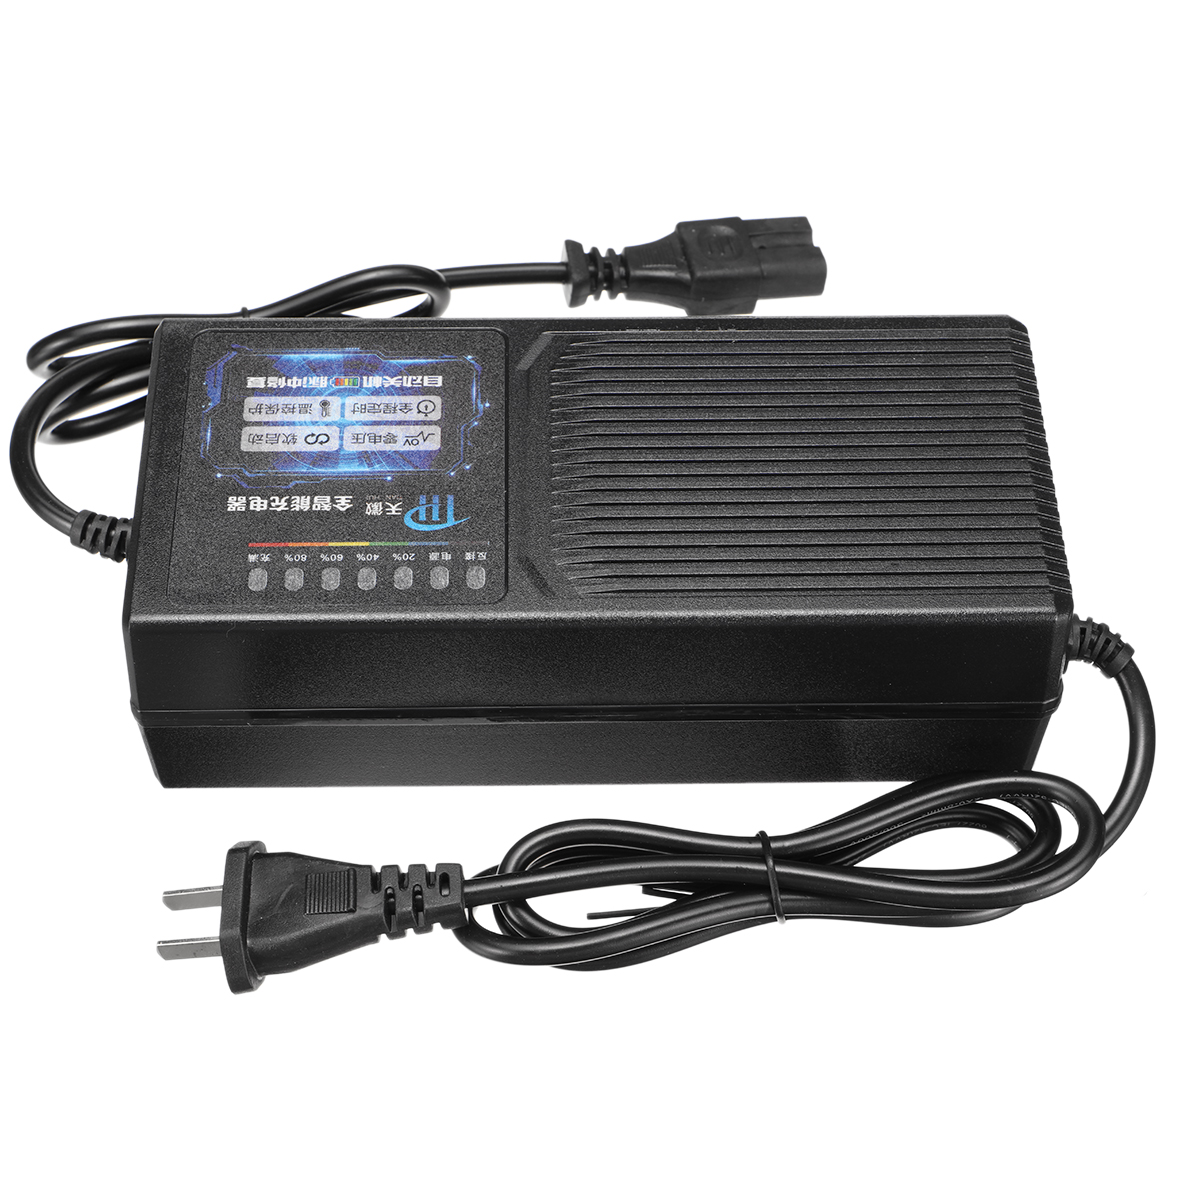 48V60V72V-20A-Electric-Vehicle-Charger-With-7-Light-Display-Power-Display-Current-1845272-8